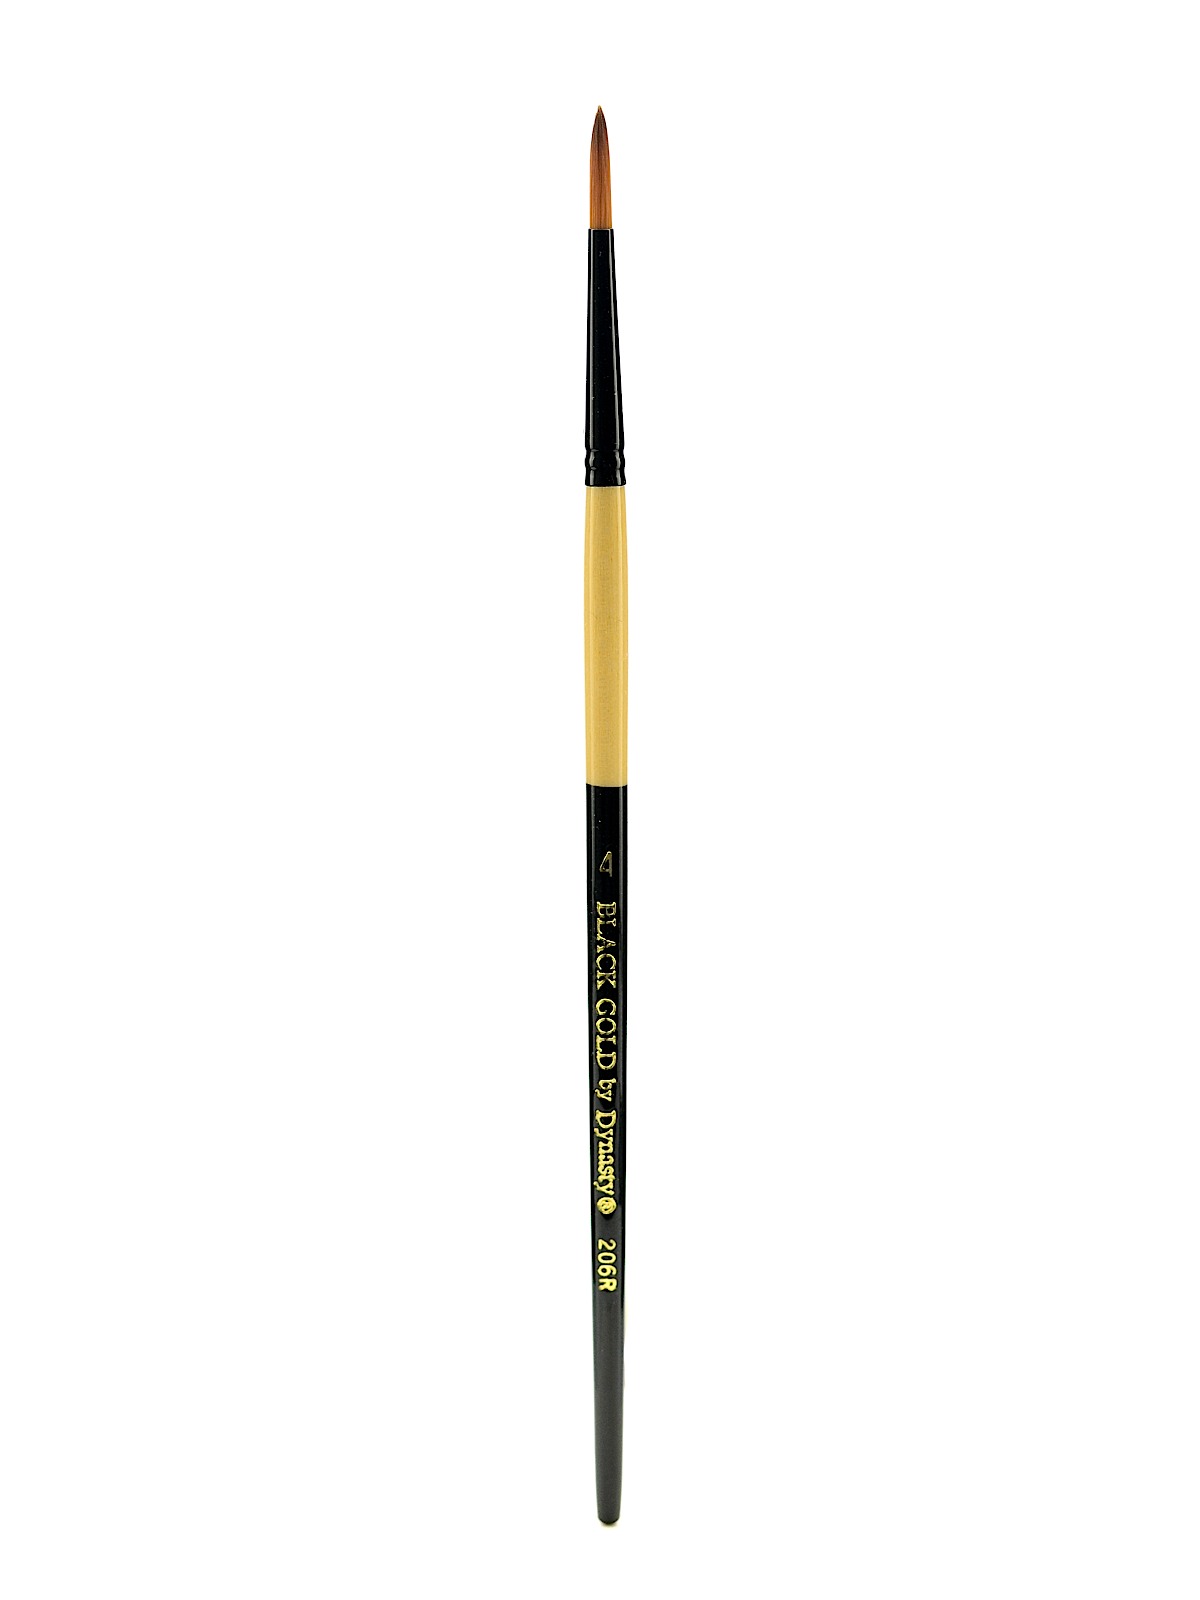 Black Gold Series Synthetic Brushes Short Handle 4 Round